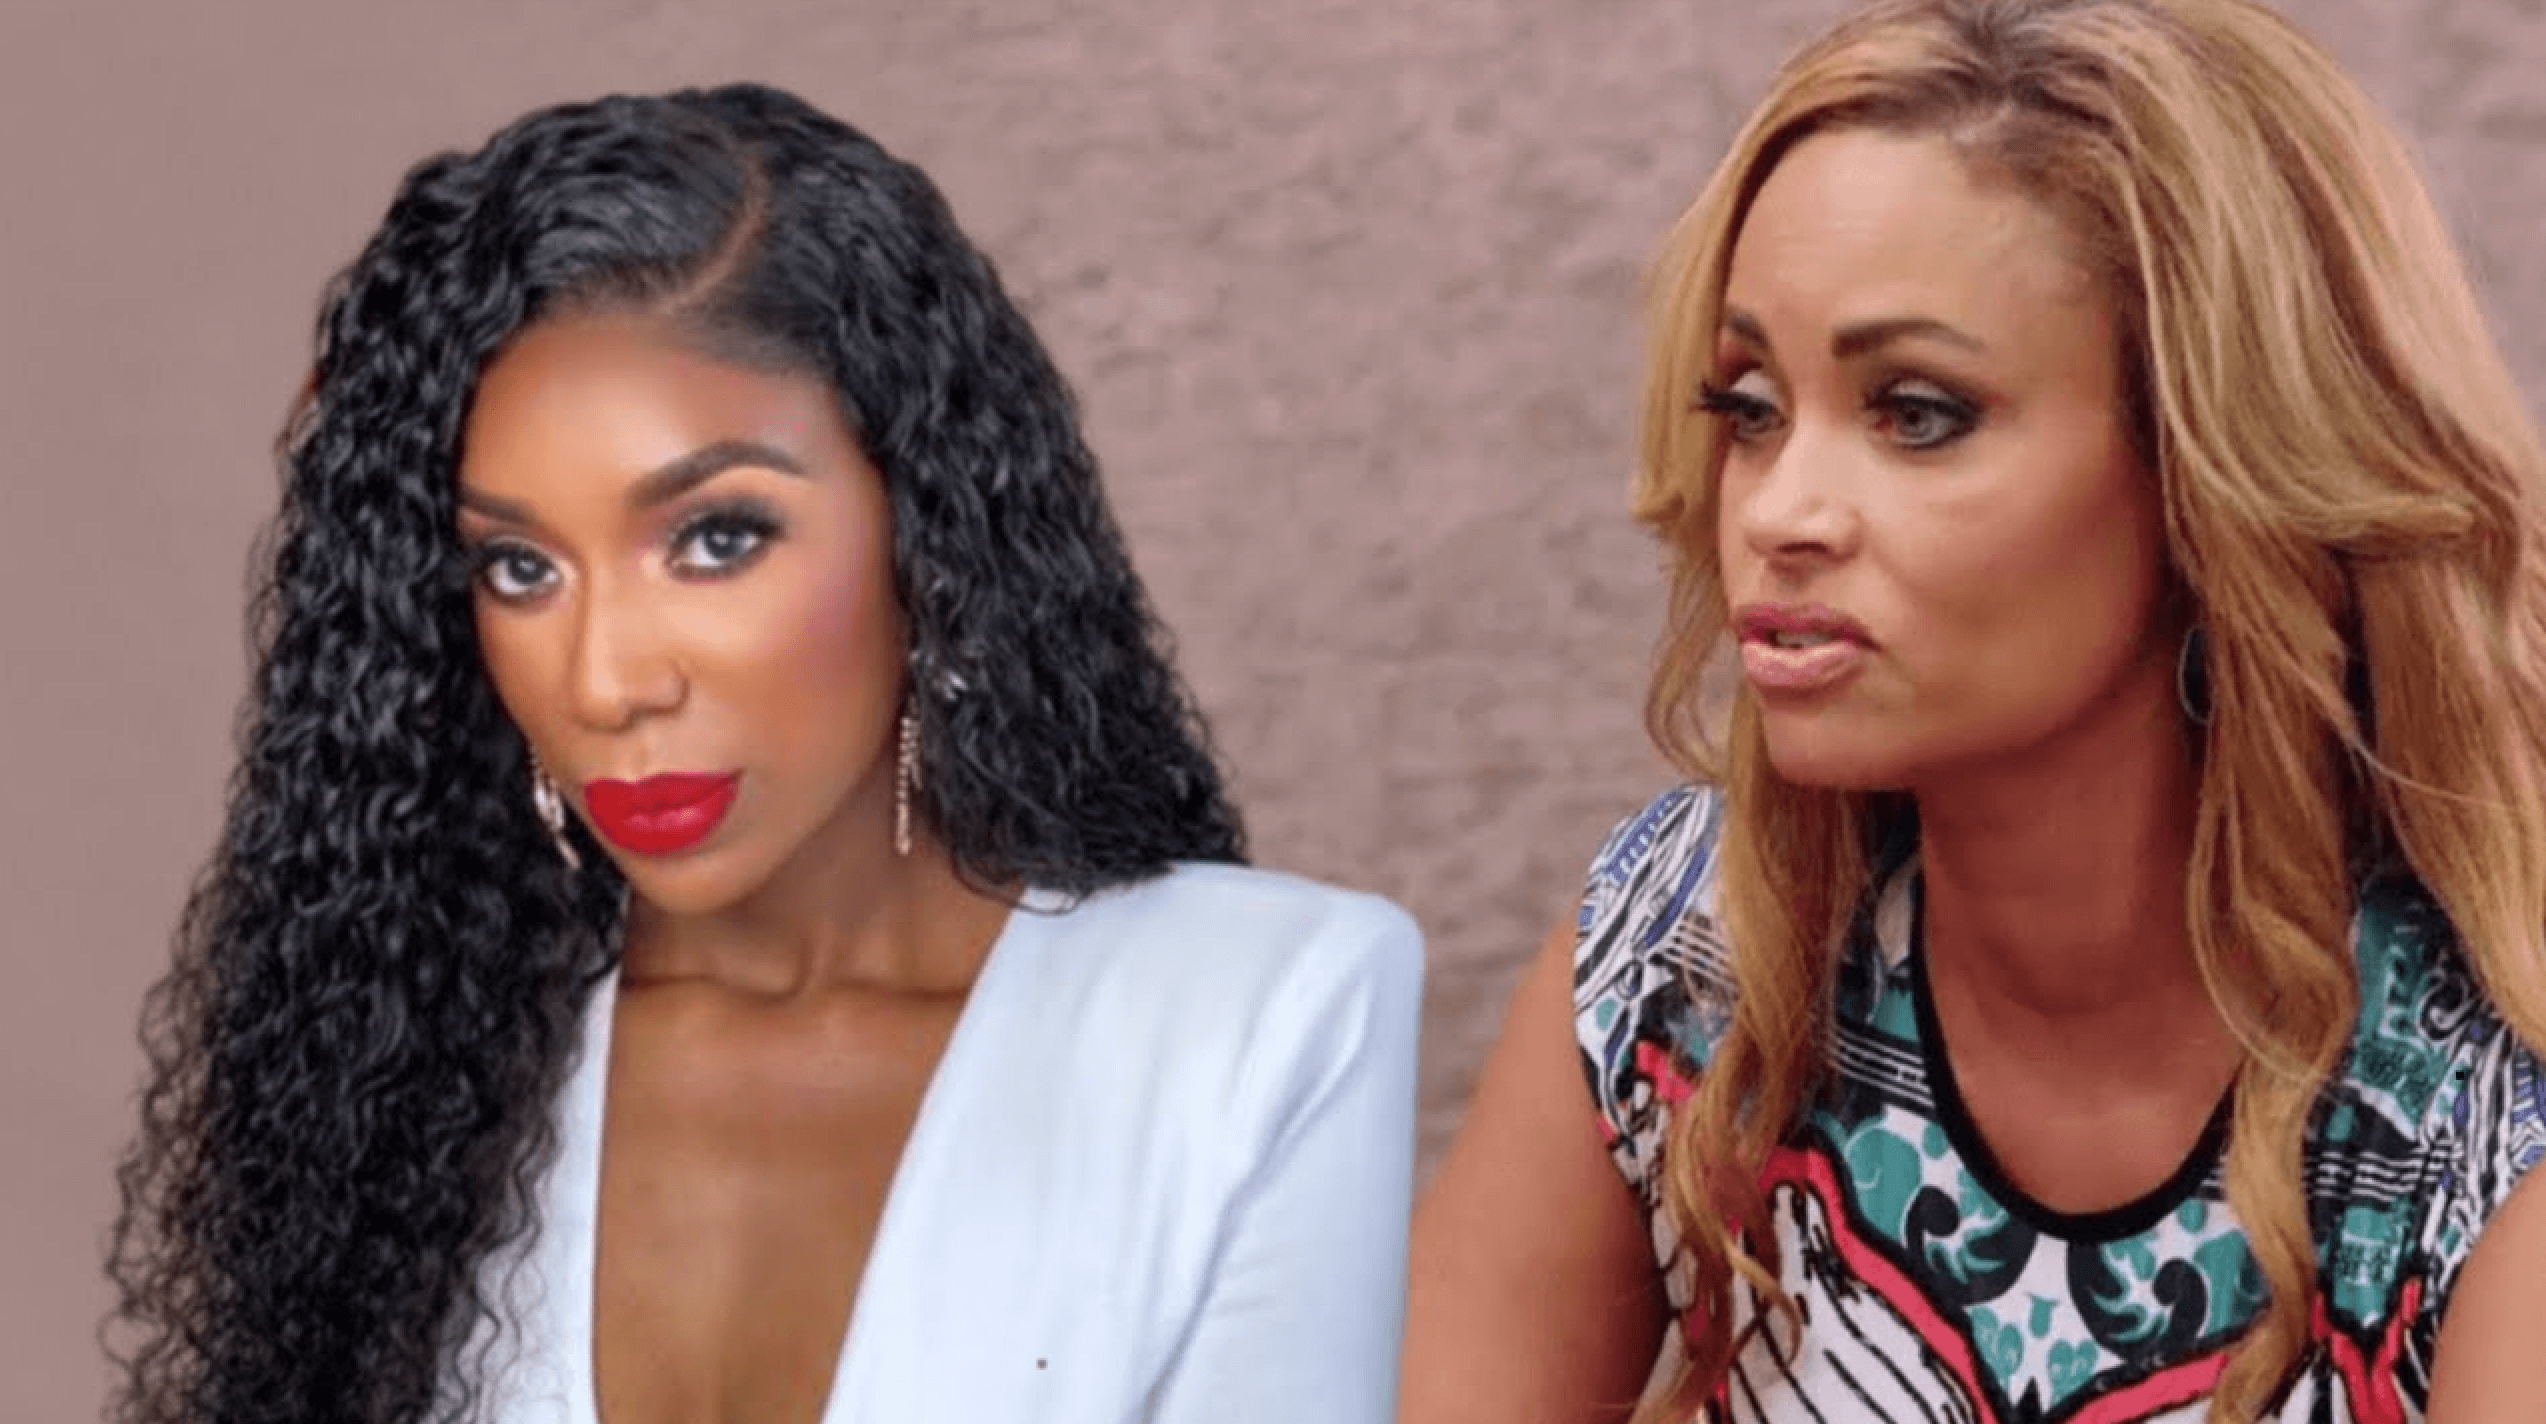 RHOP’s Wendy Osefo BLASTS Gizelle Bryant For Body Shaming Her & ‘Attacking’ Her Family With Cheating Rumors: ‘You Were So PRESSED’!